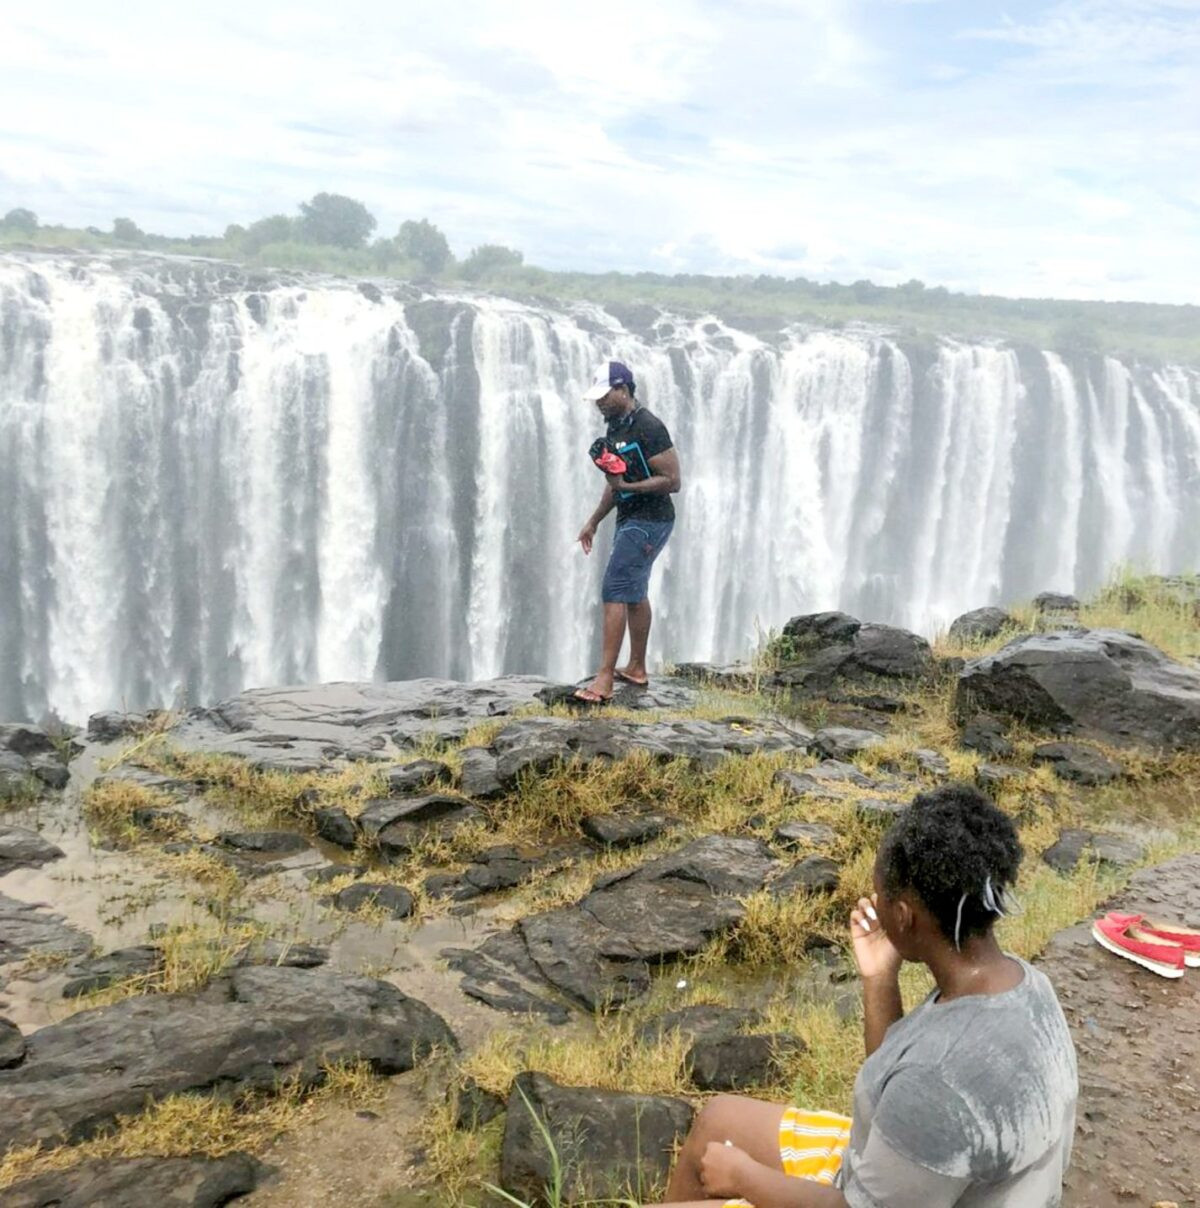 Tourist Falls To His Death Moments After Posing For Photo At The Cliff Of Victoria Falls In Zimbabwe